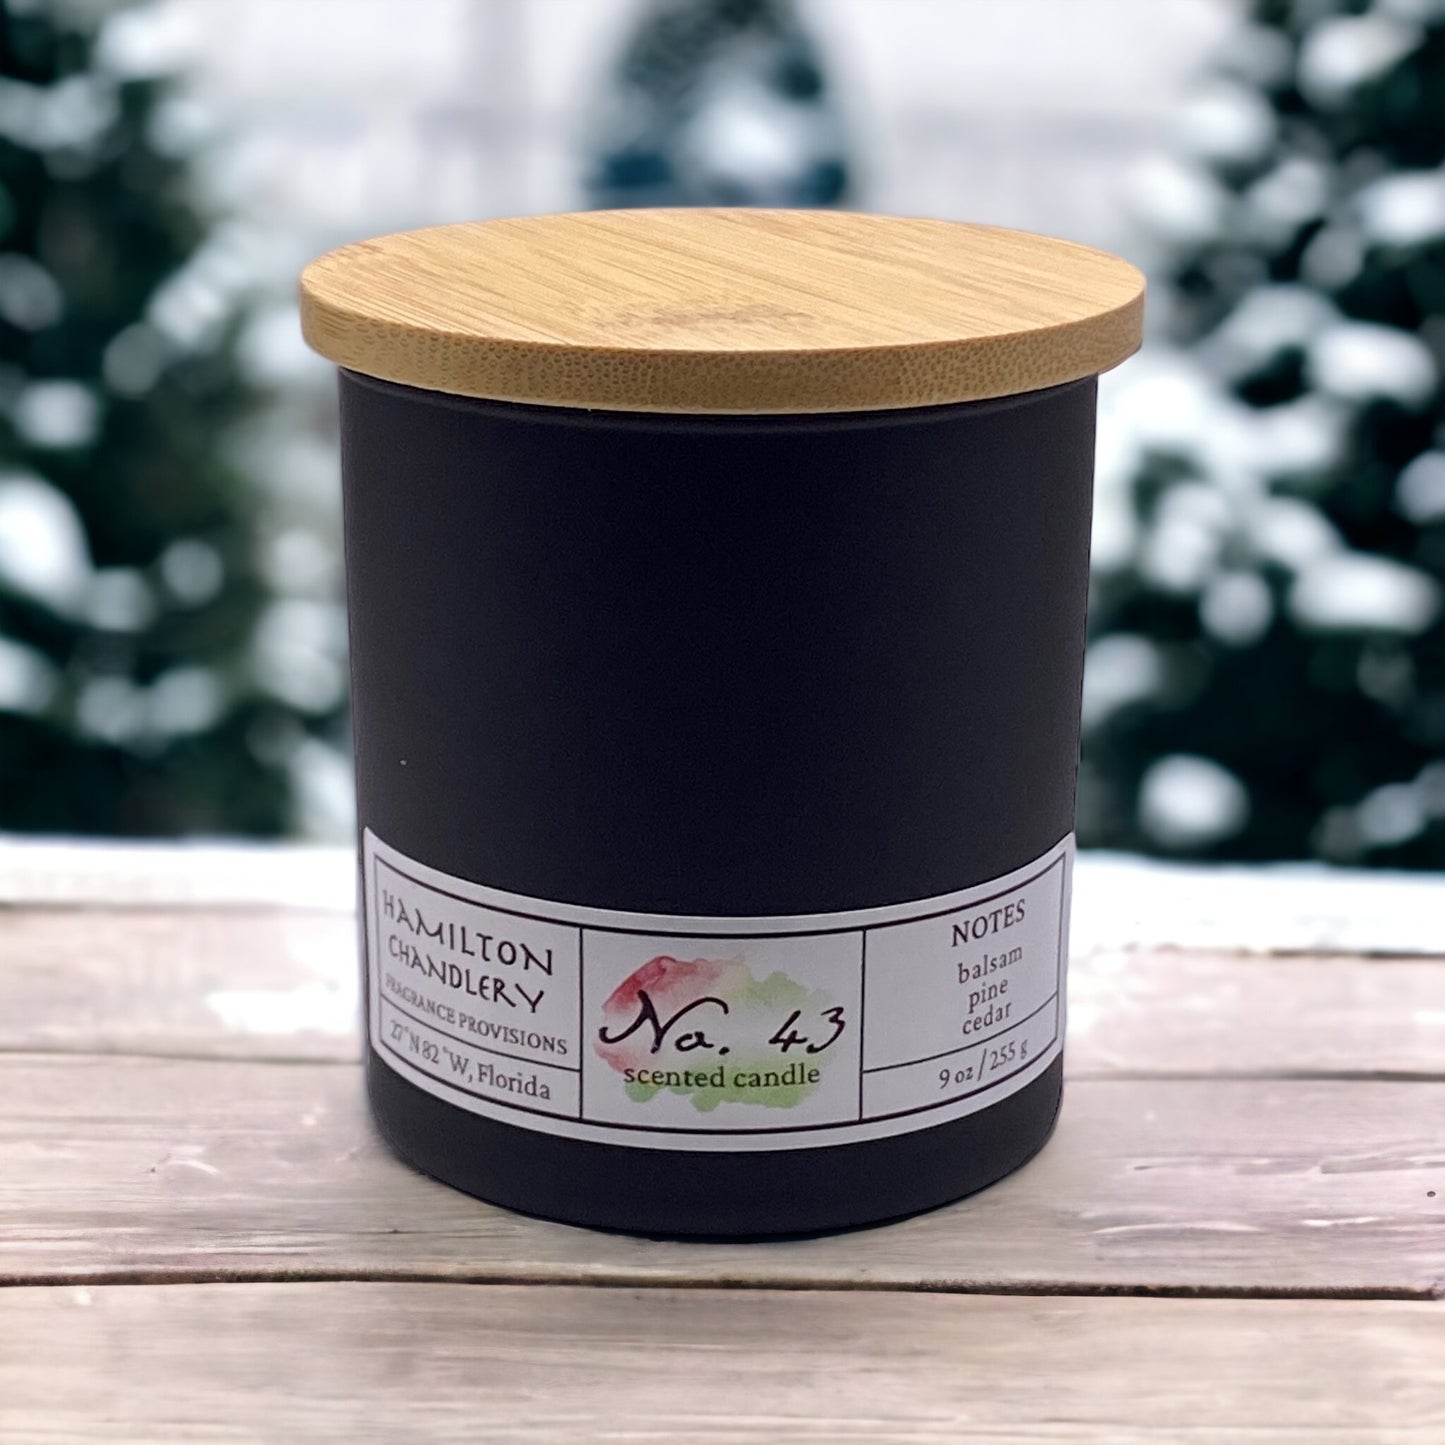 Fragrance No. 43 Matte Black Candle on Windowsill with Snow Covered Trees in Background | Hamilton Chandlery